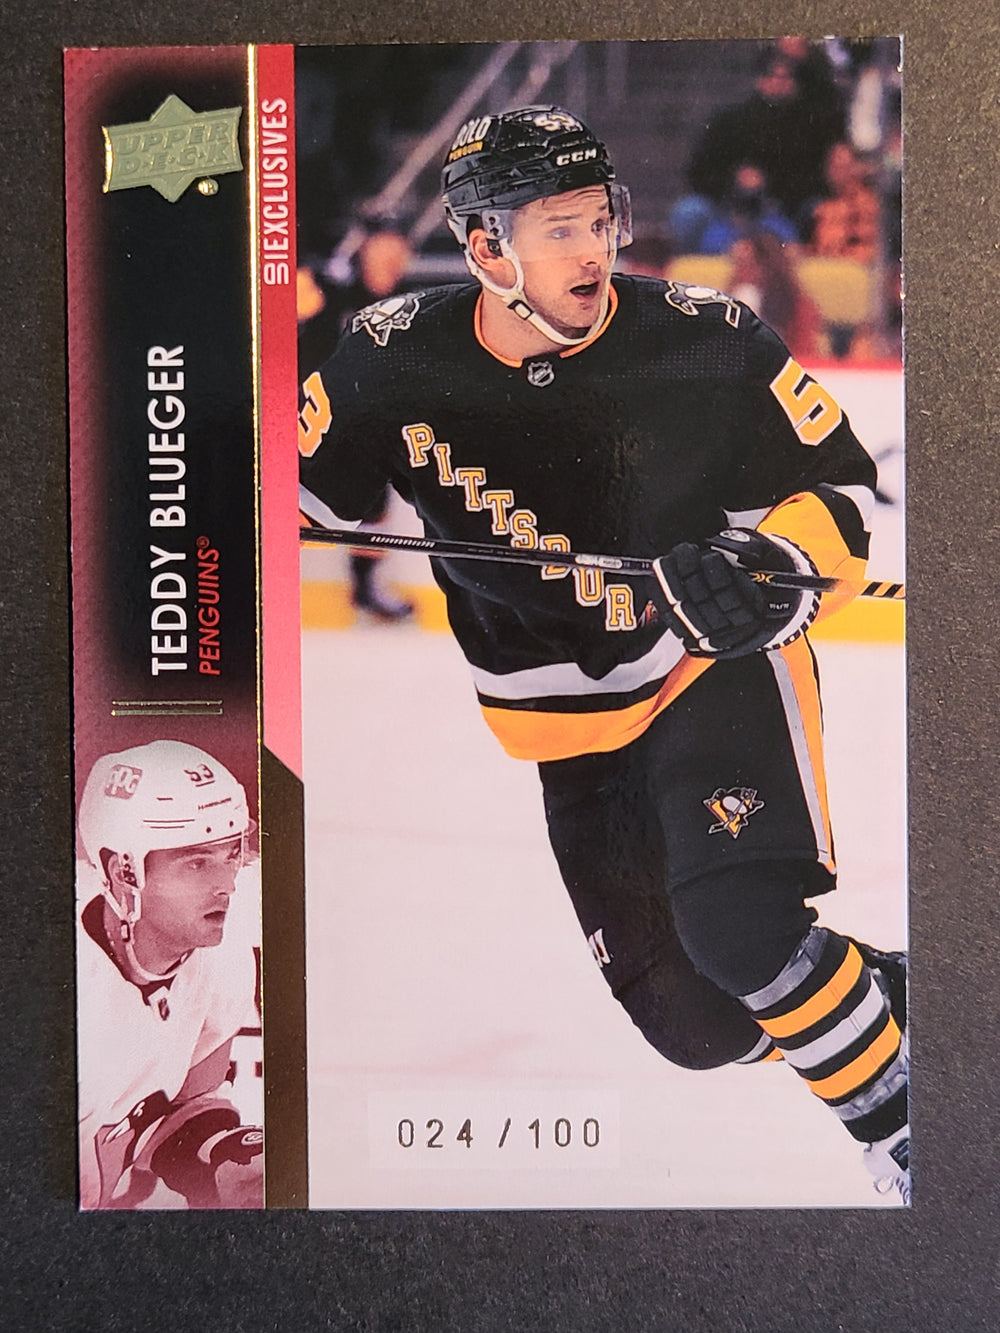 2021-22 Upper Deck Extended Exclusives #617 Teddy Blueger Pittsburgh Penguins 24/100